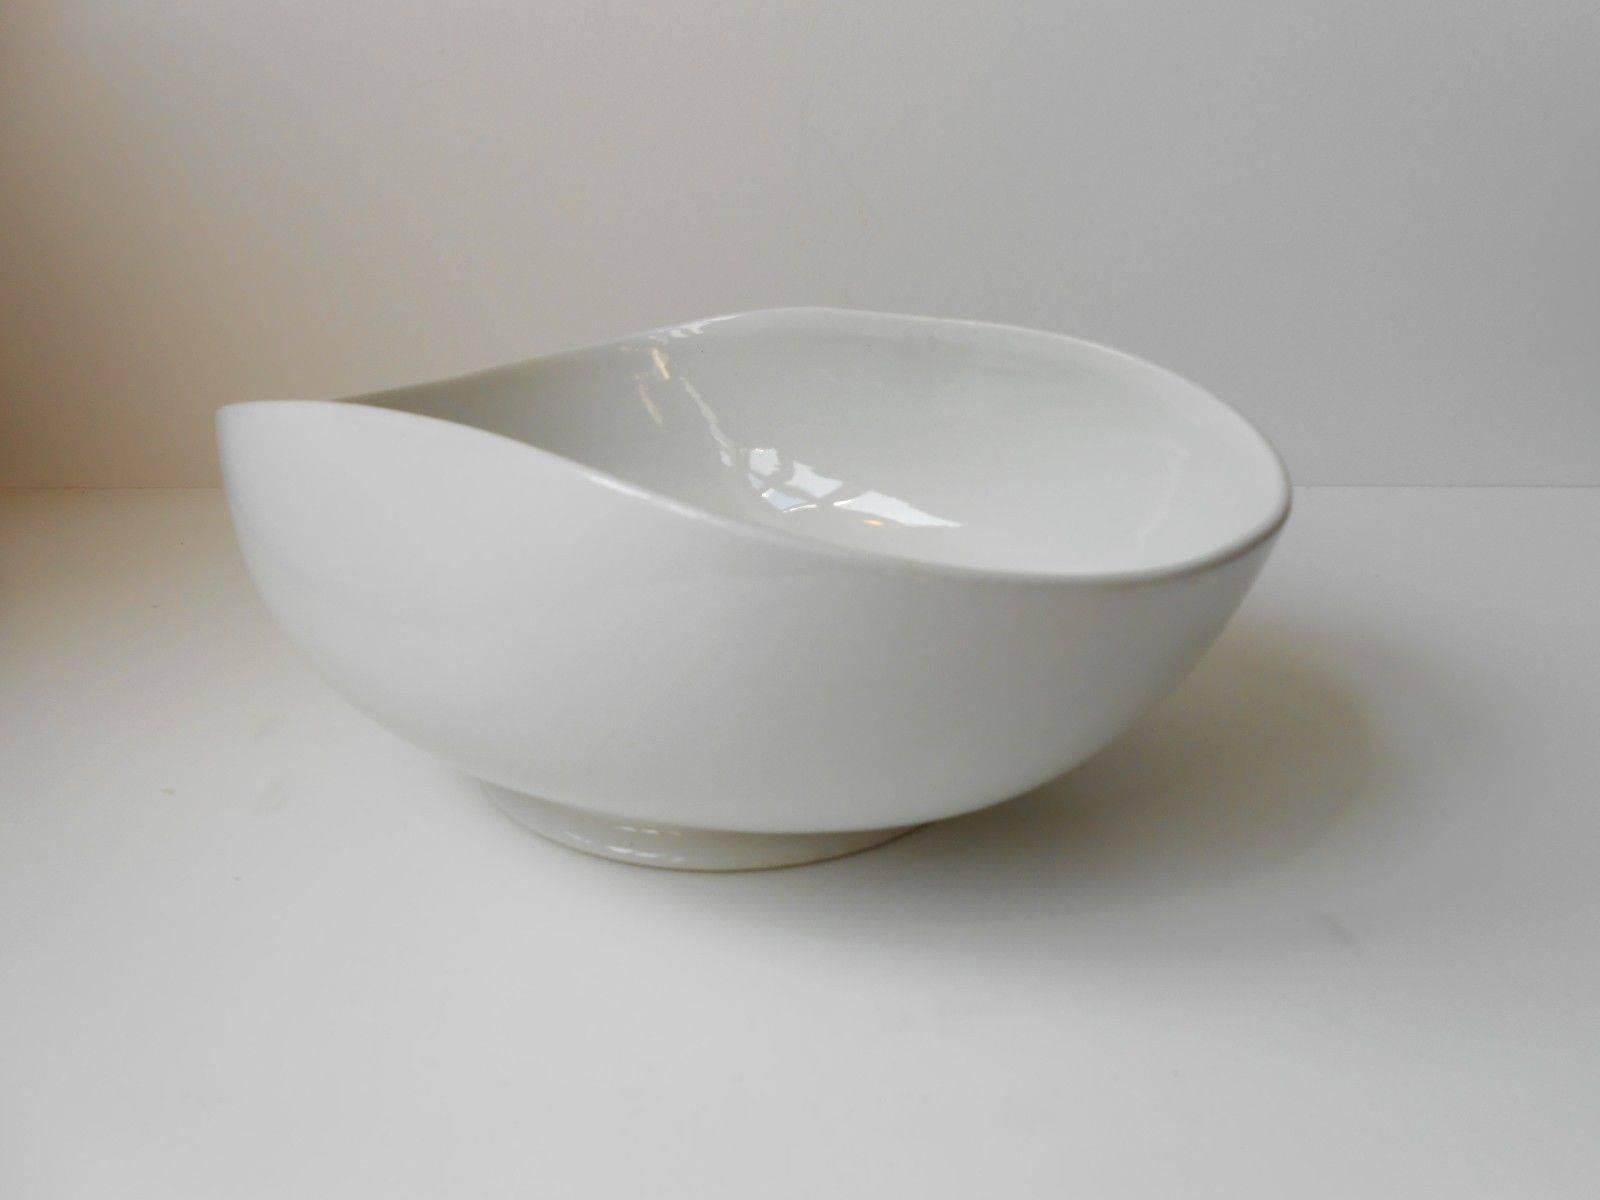 This rare curved white glazed ceramic bowl was designed in 1938 by the Swedish ceramist Wilhelm Kåge. It's a part of the soft forms lin (Fin: Mjuka Formernas). The open organic and biomorphic design, while strikingly simple, was ingeniously designed